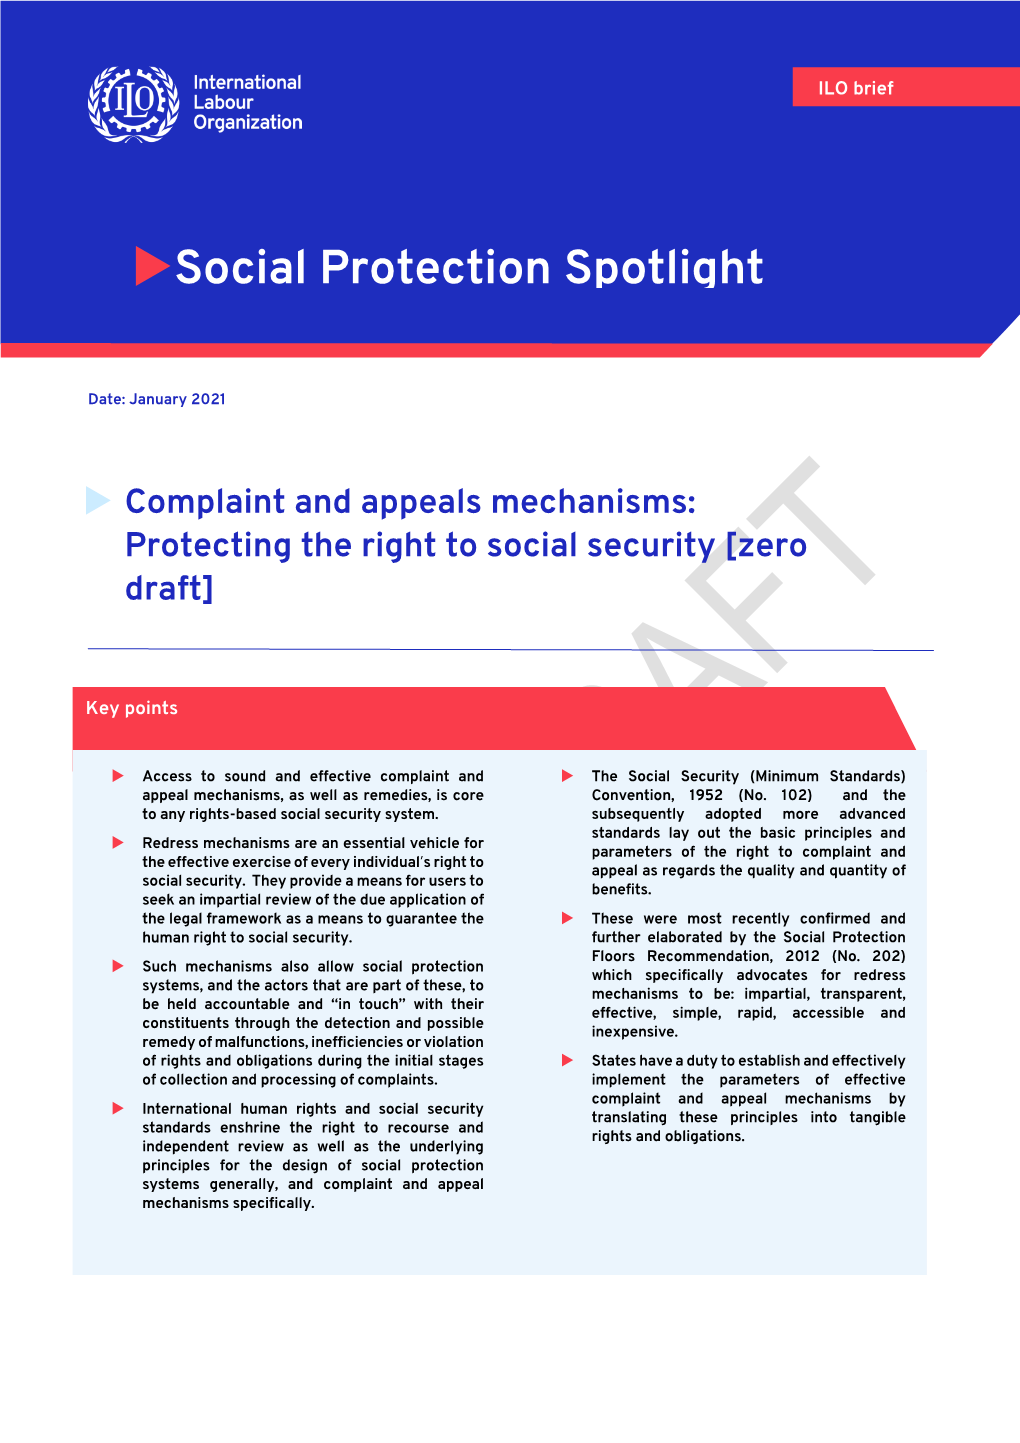 Complaint and Appeals Mechanisms: Protecting the Right to Social Security [Zero Draft]